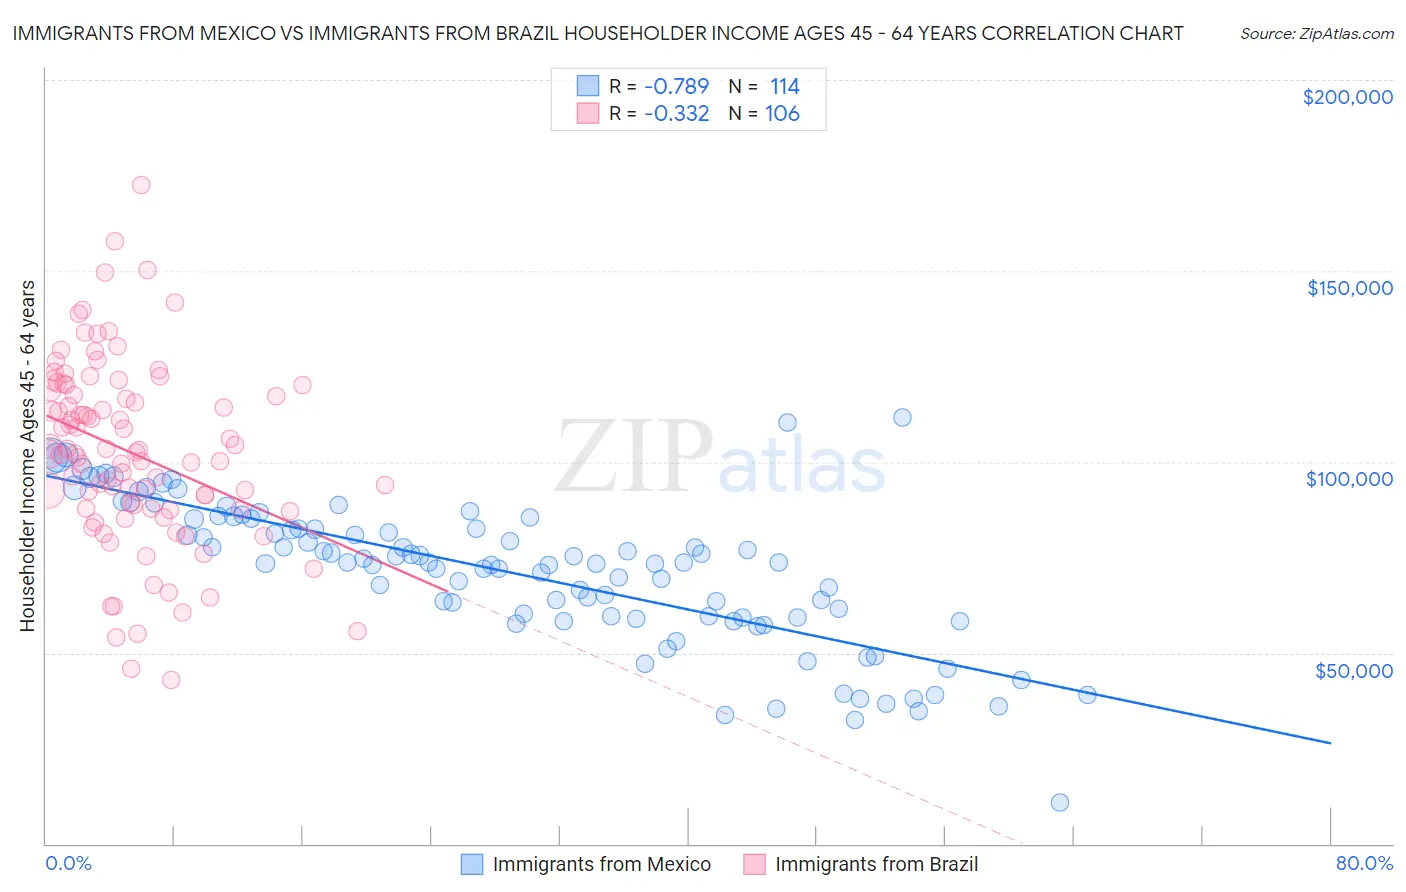 Immigrants from Mexico vs Immigrants from Brazil Householder Income Ages 45 - 64 years